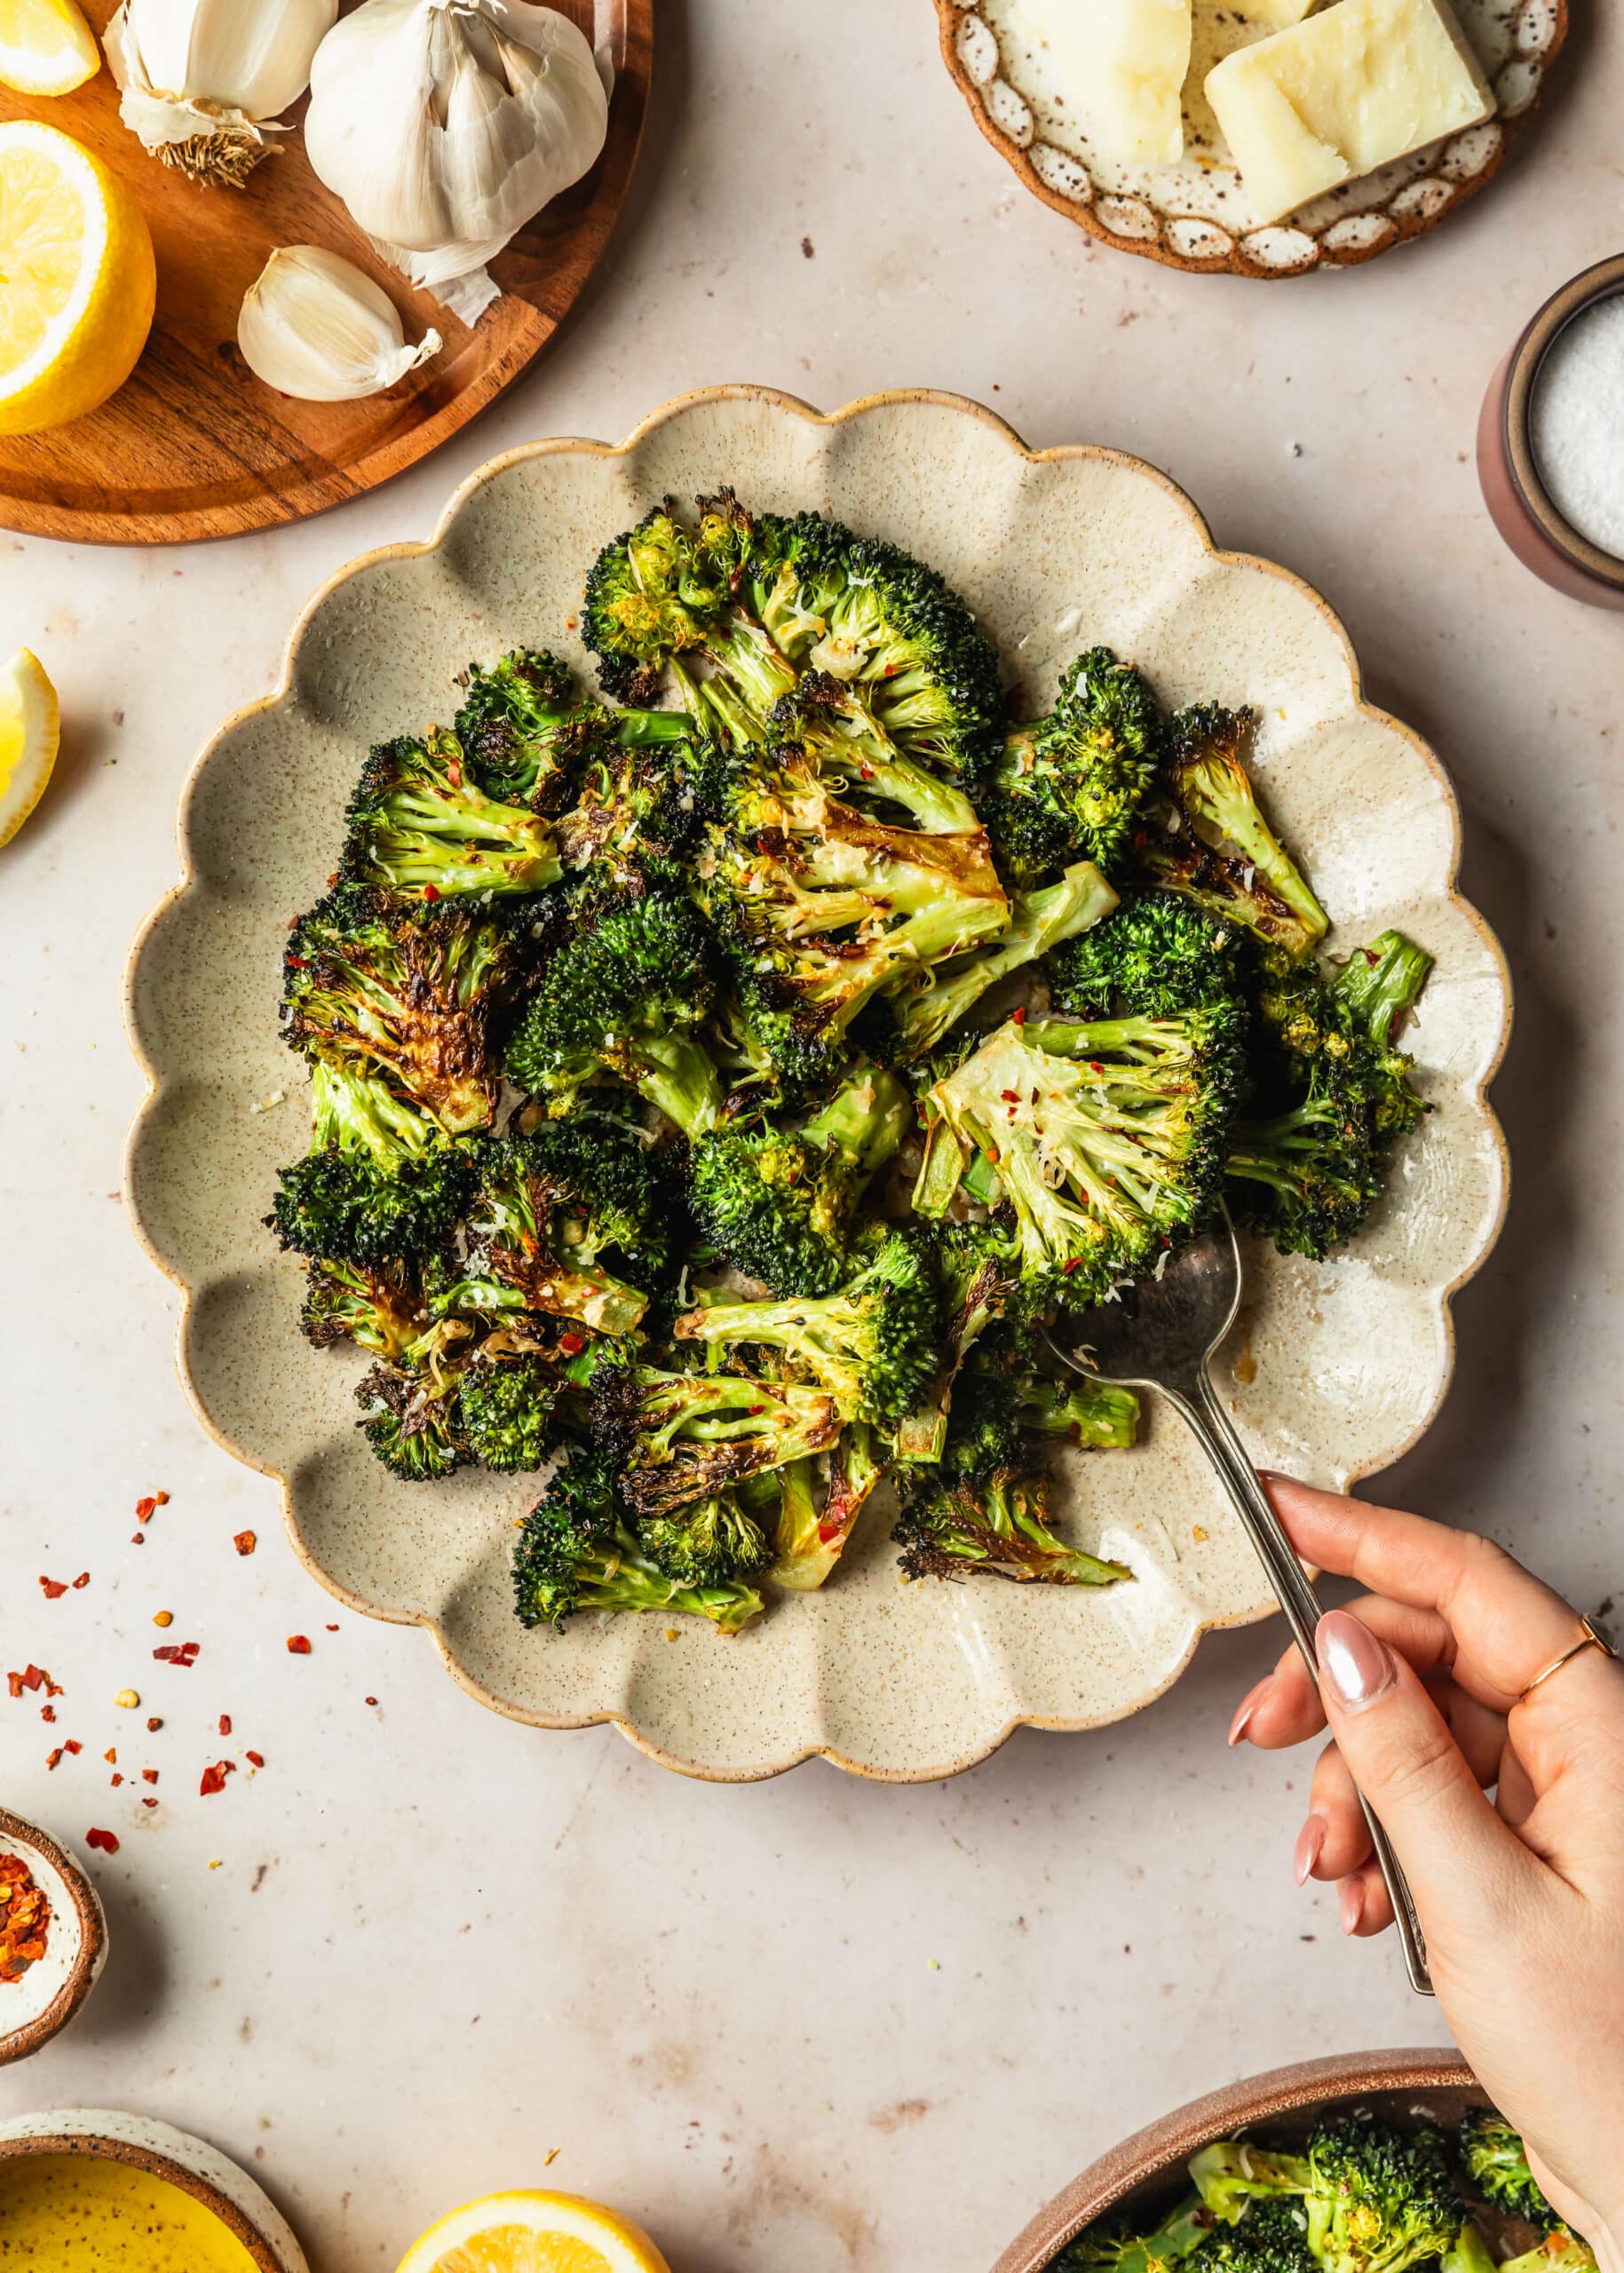 A hand spooning roasted broccolini off a cream platter on a tan counter next to brown bowls of parmesan, garlic, salt, red pepper flakes, and lemons.